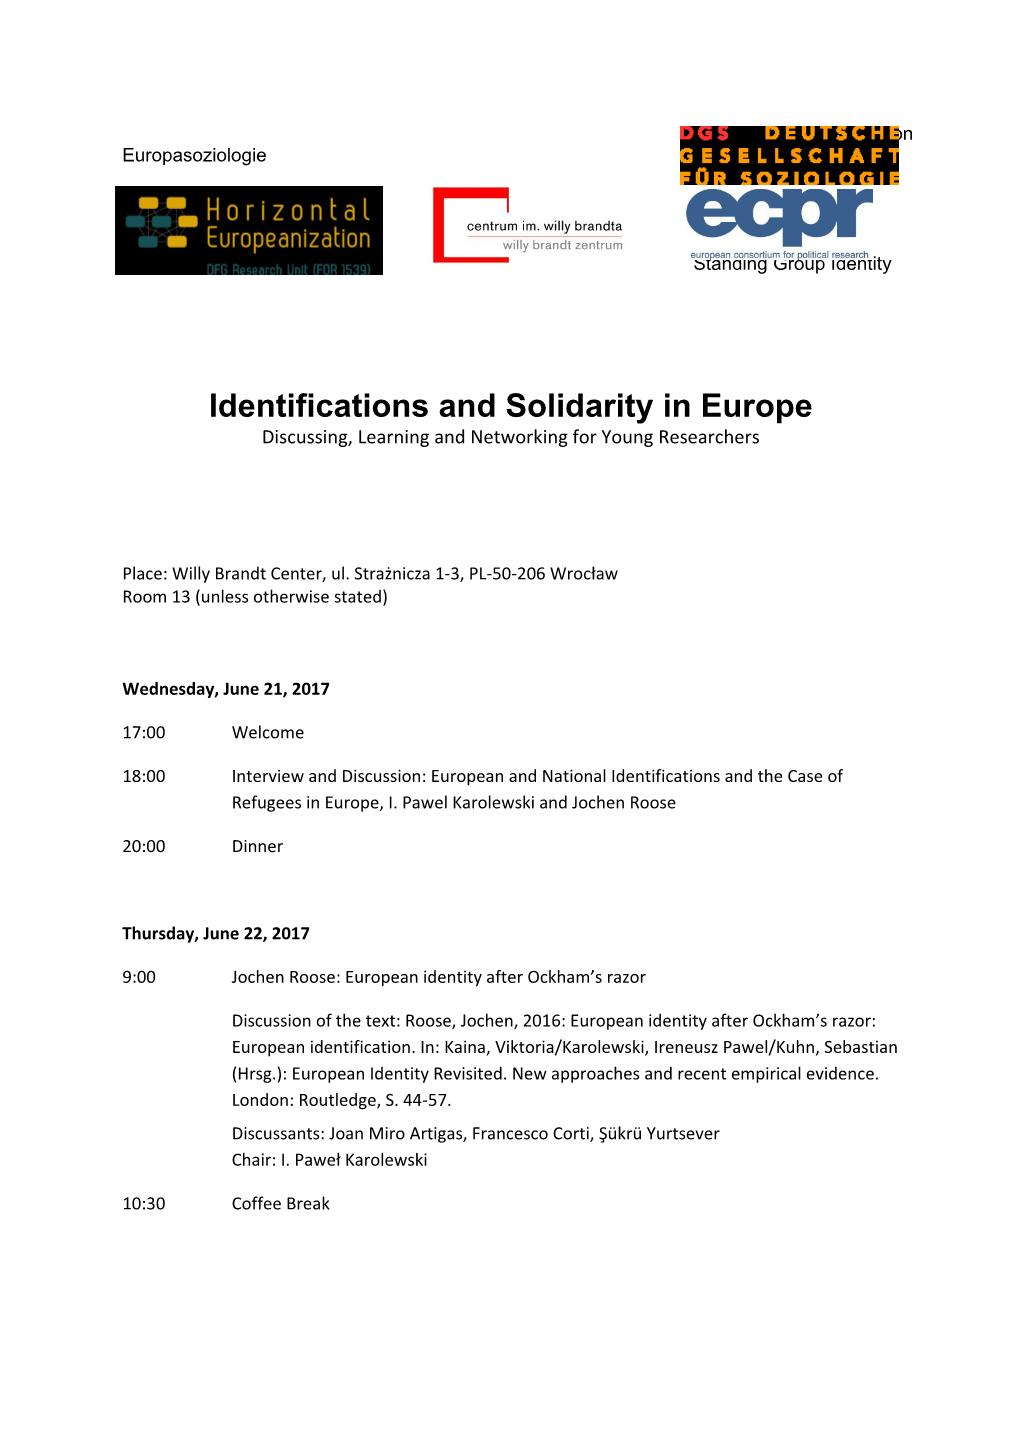 Identifications and Solidarity in Europe